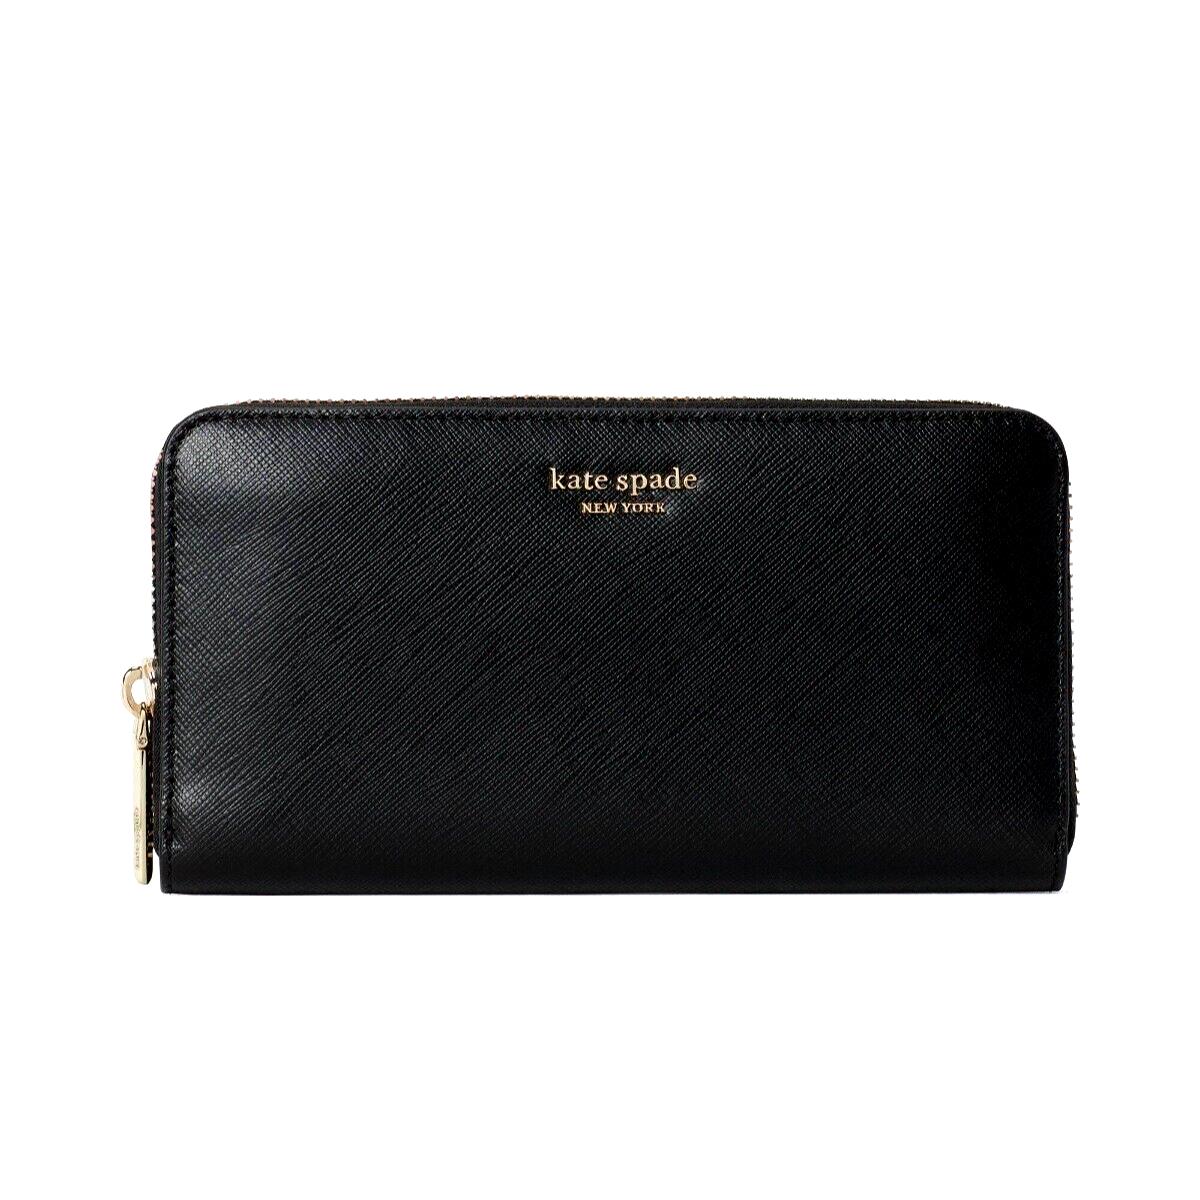 New Kate Spade Spencer Saffiano Leather Zip Around Continental Wallet Black